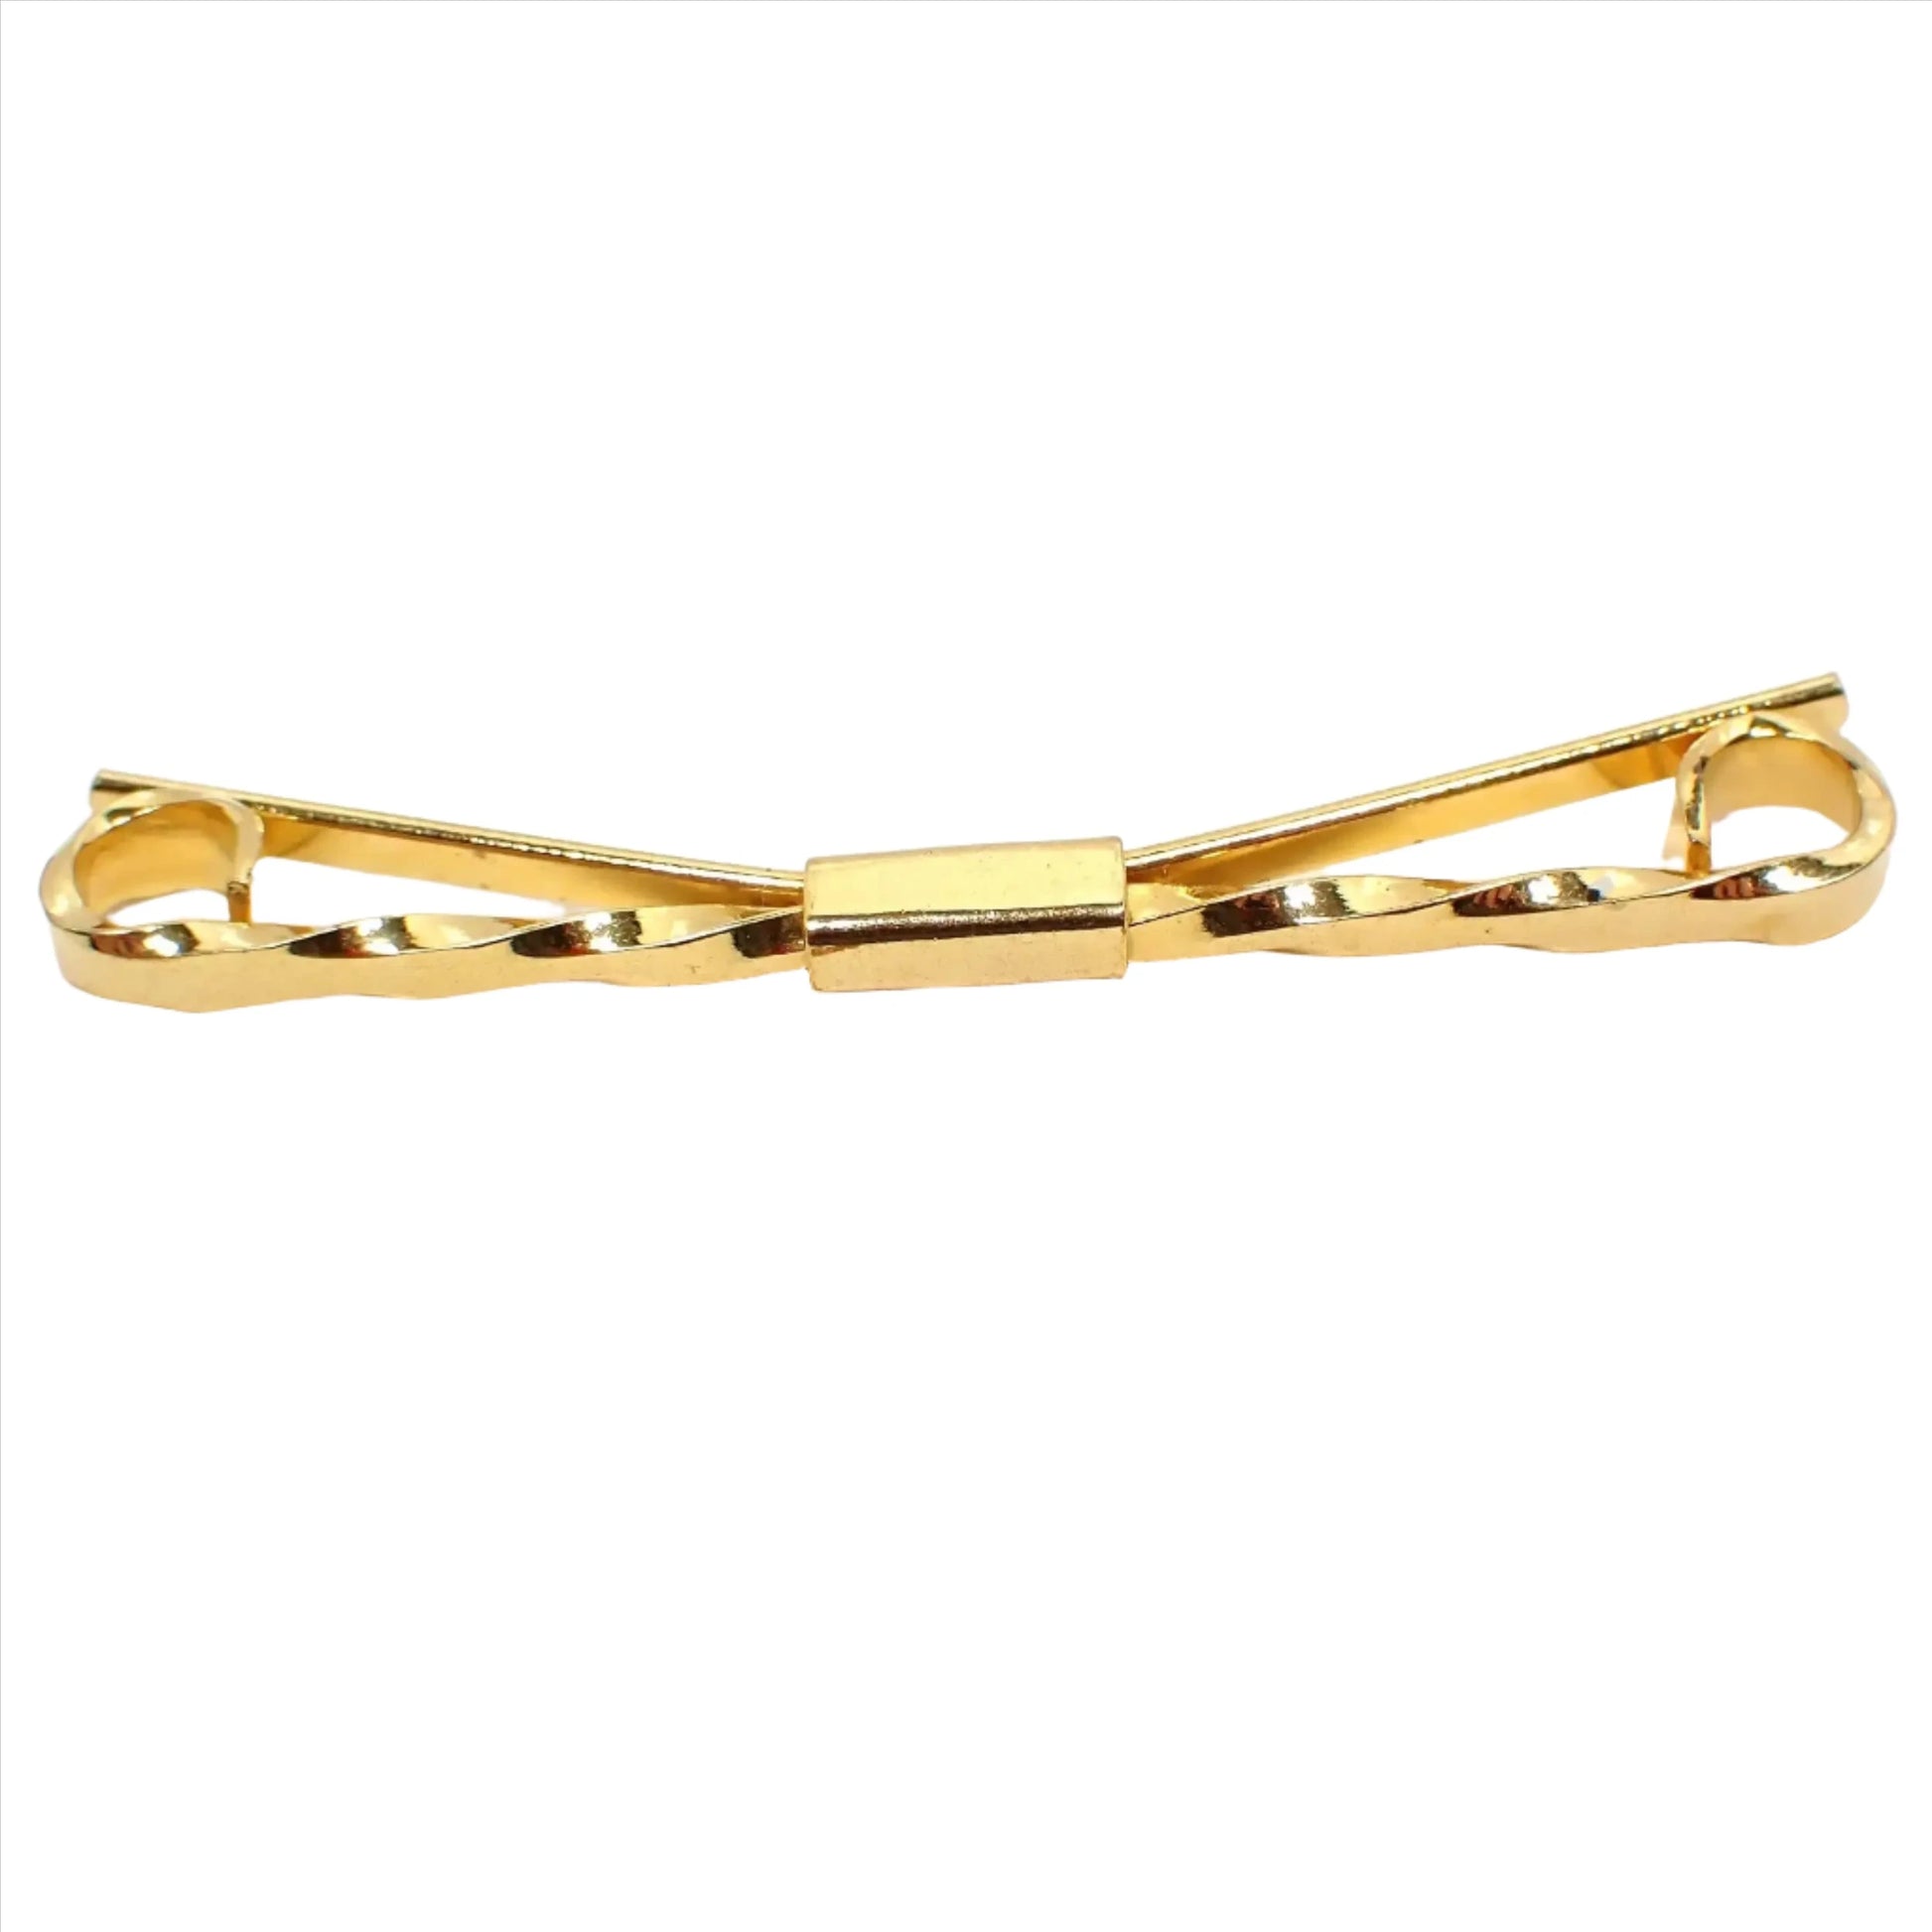 Enlarged front view of the retro vintage collar clip stay. The metal is gold tone plated in color. The front has a twisted design with curled ends.